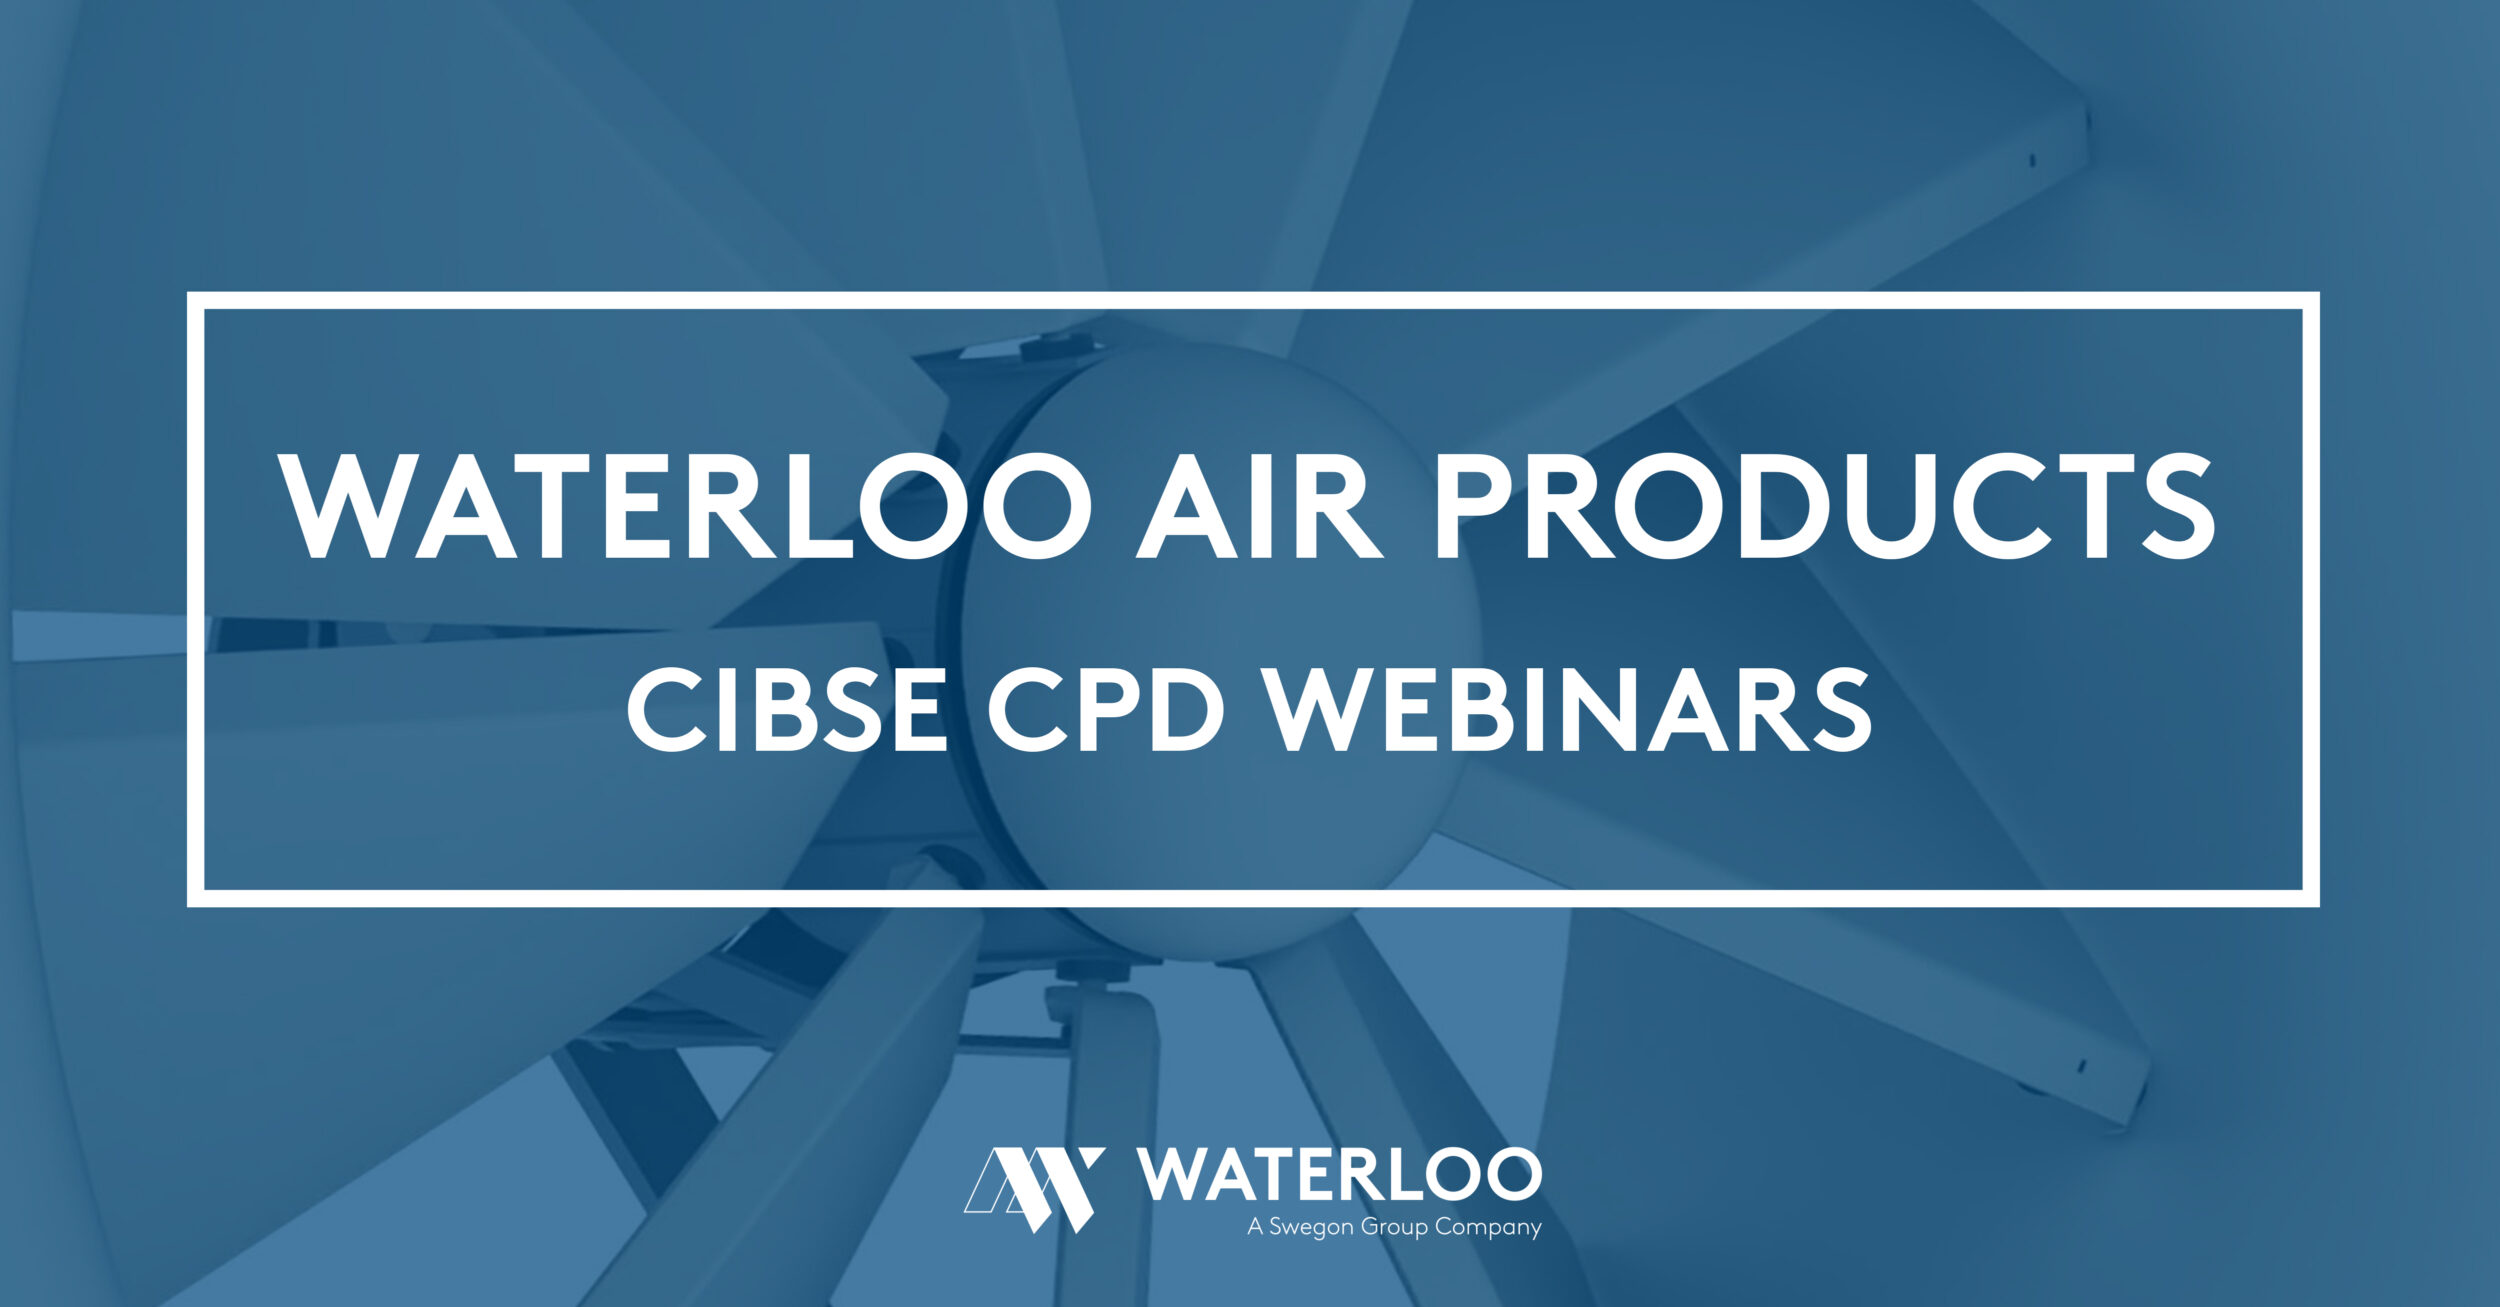 Waterloo’s CIBSE approved CPD’s are now available to all as live Webinars